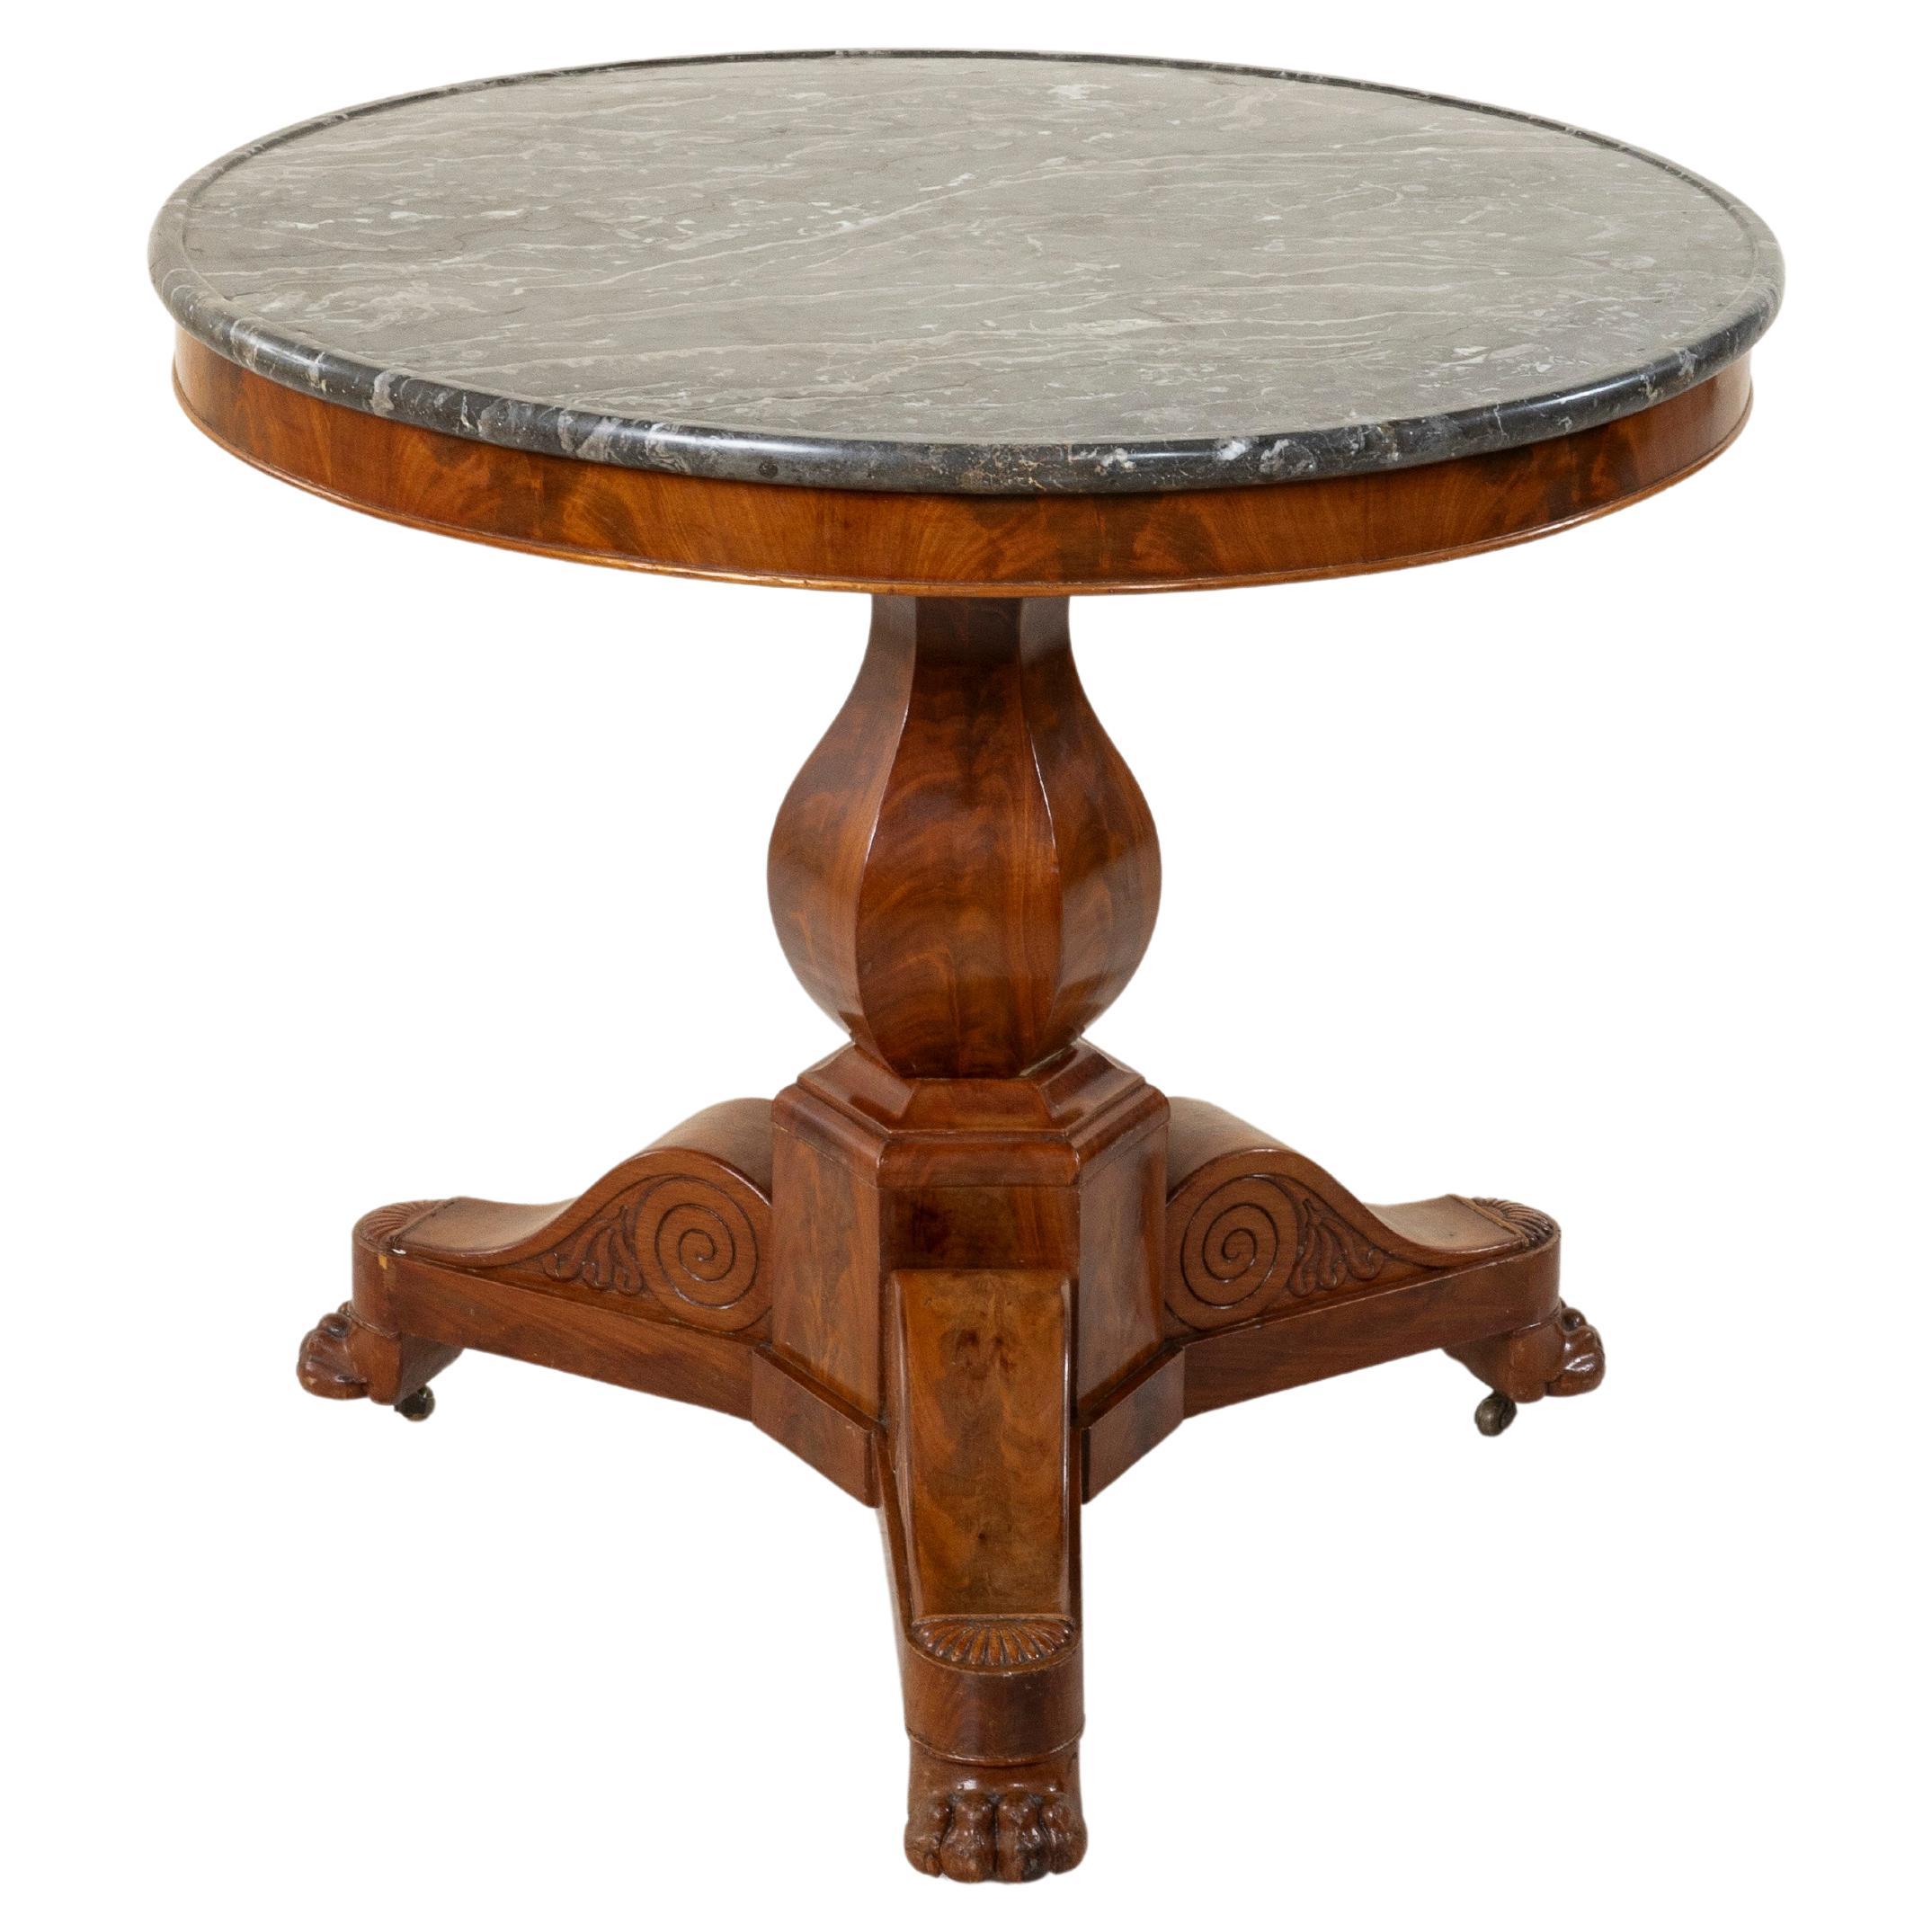 Mid-19th Century French Restauration Period Mahogany and Marble Pedestal Table For Sale